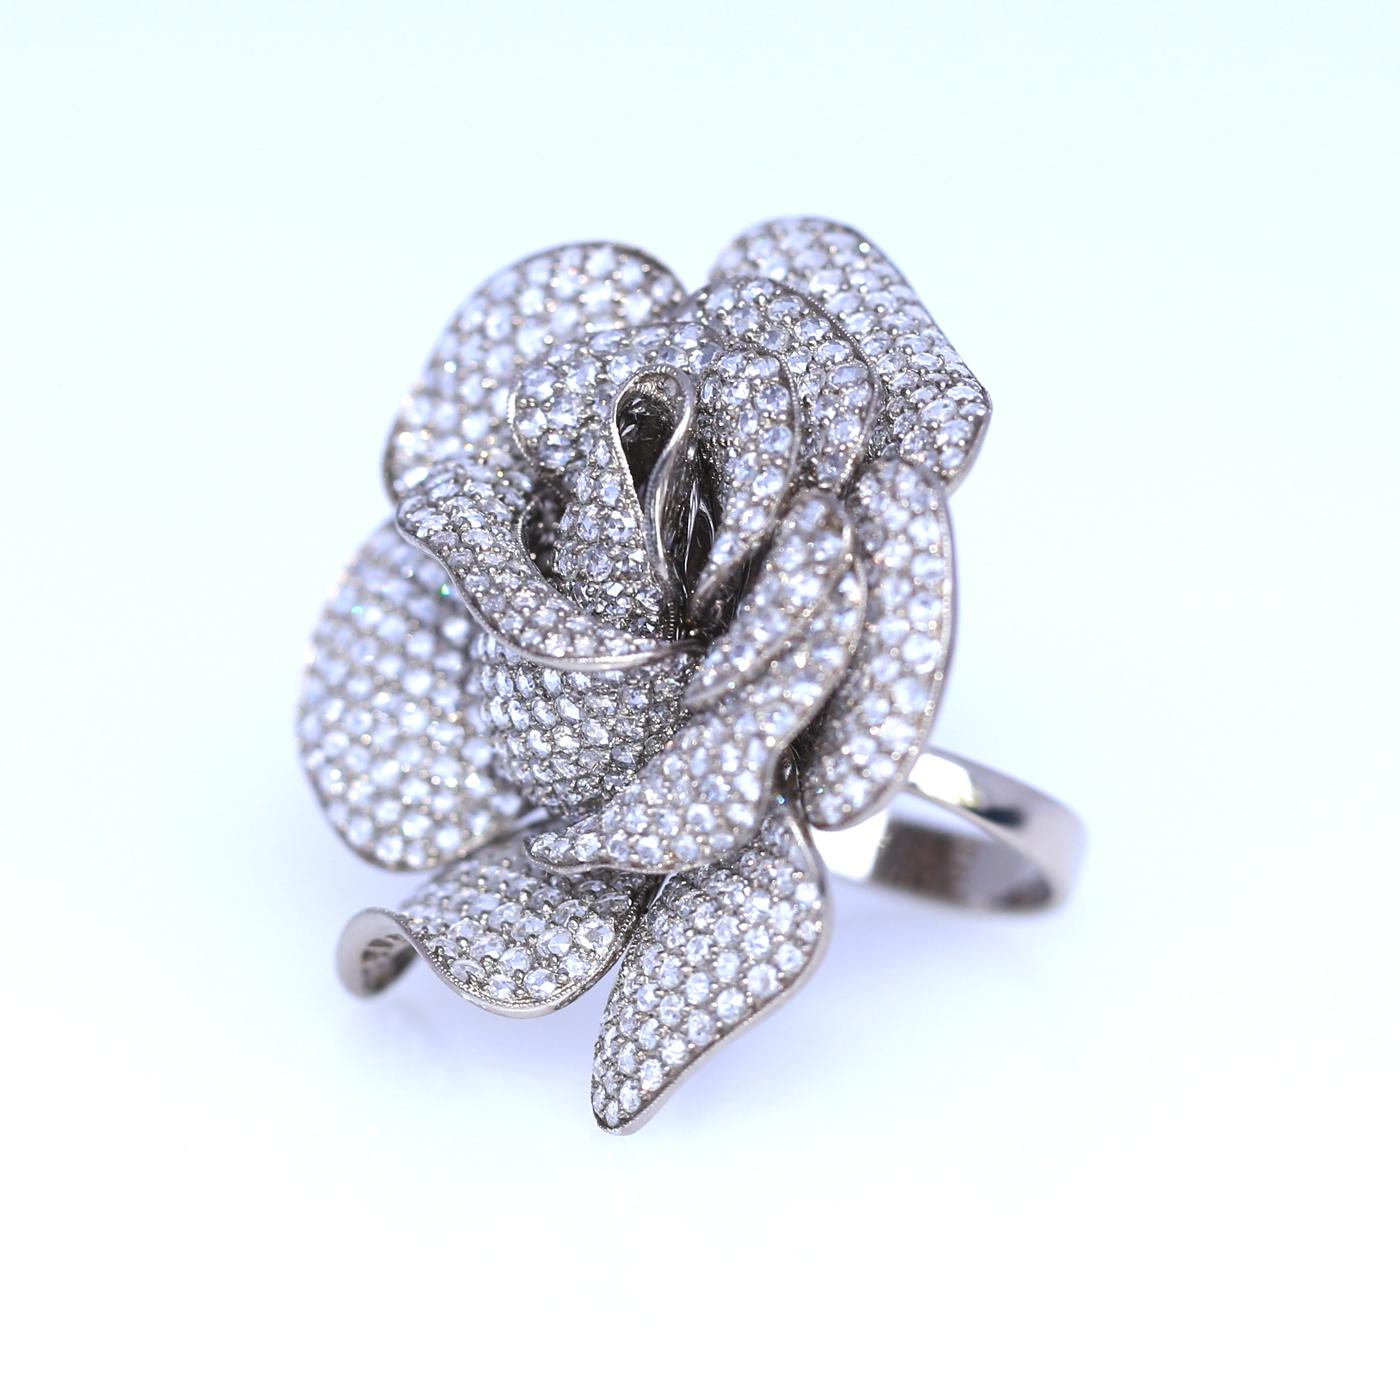 18K White Gold Ring and Brooch Rose Flower fully consist of fine Diamonds of different sizes. The jeweler craft is just outstanding! Diamonds are fixed with no visible casting. Rose flower petals are delicately crafted to mimic the real flower.